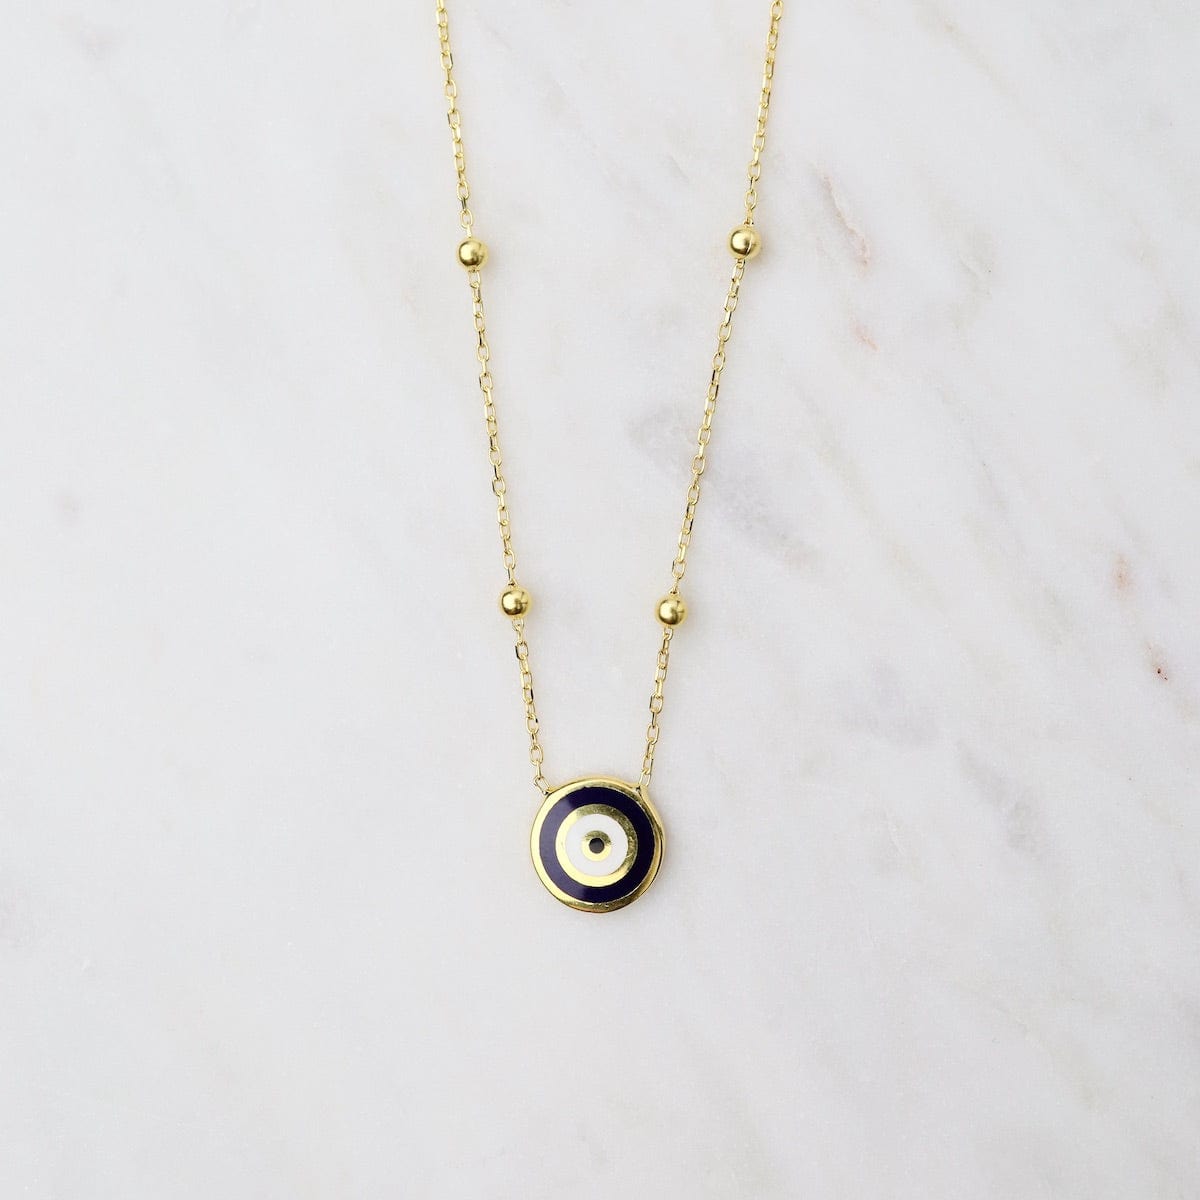 NKL-GPL Evil Eye Pendant on Dotted Chain - Gold Plated